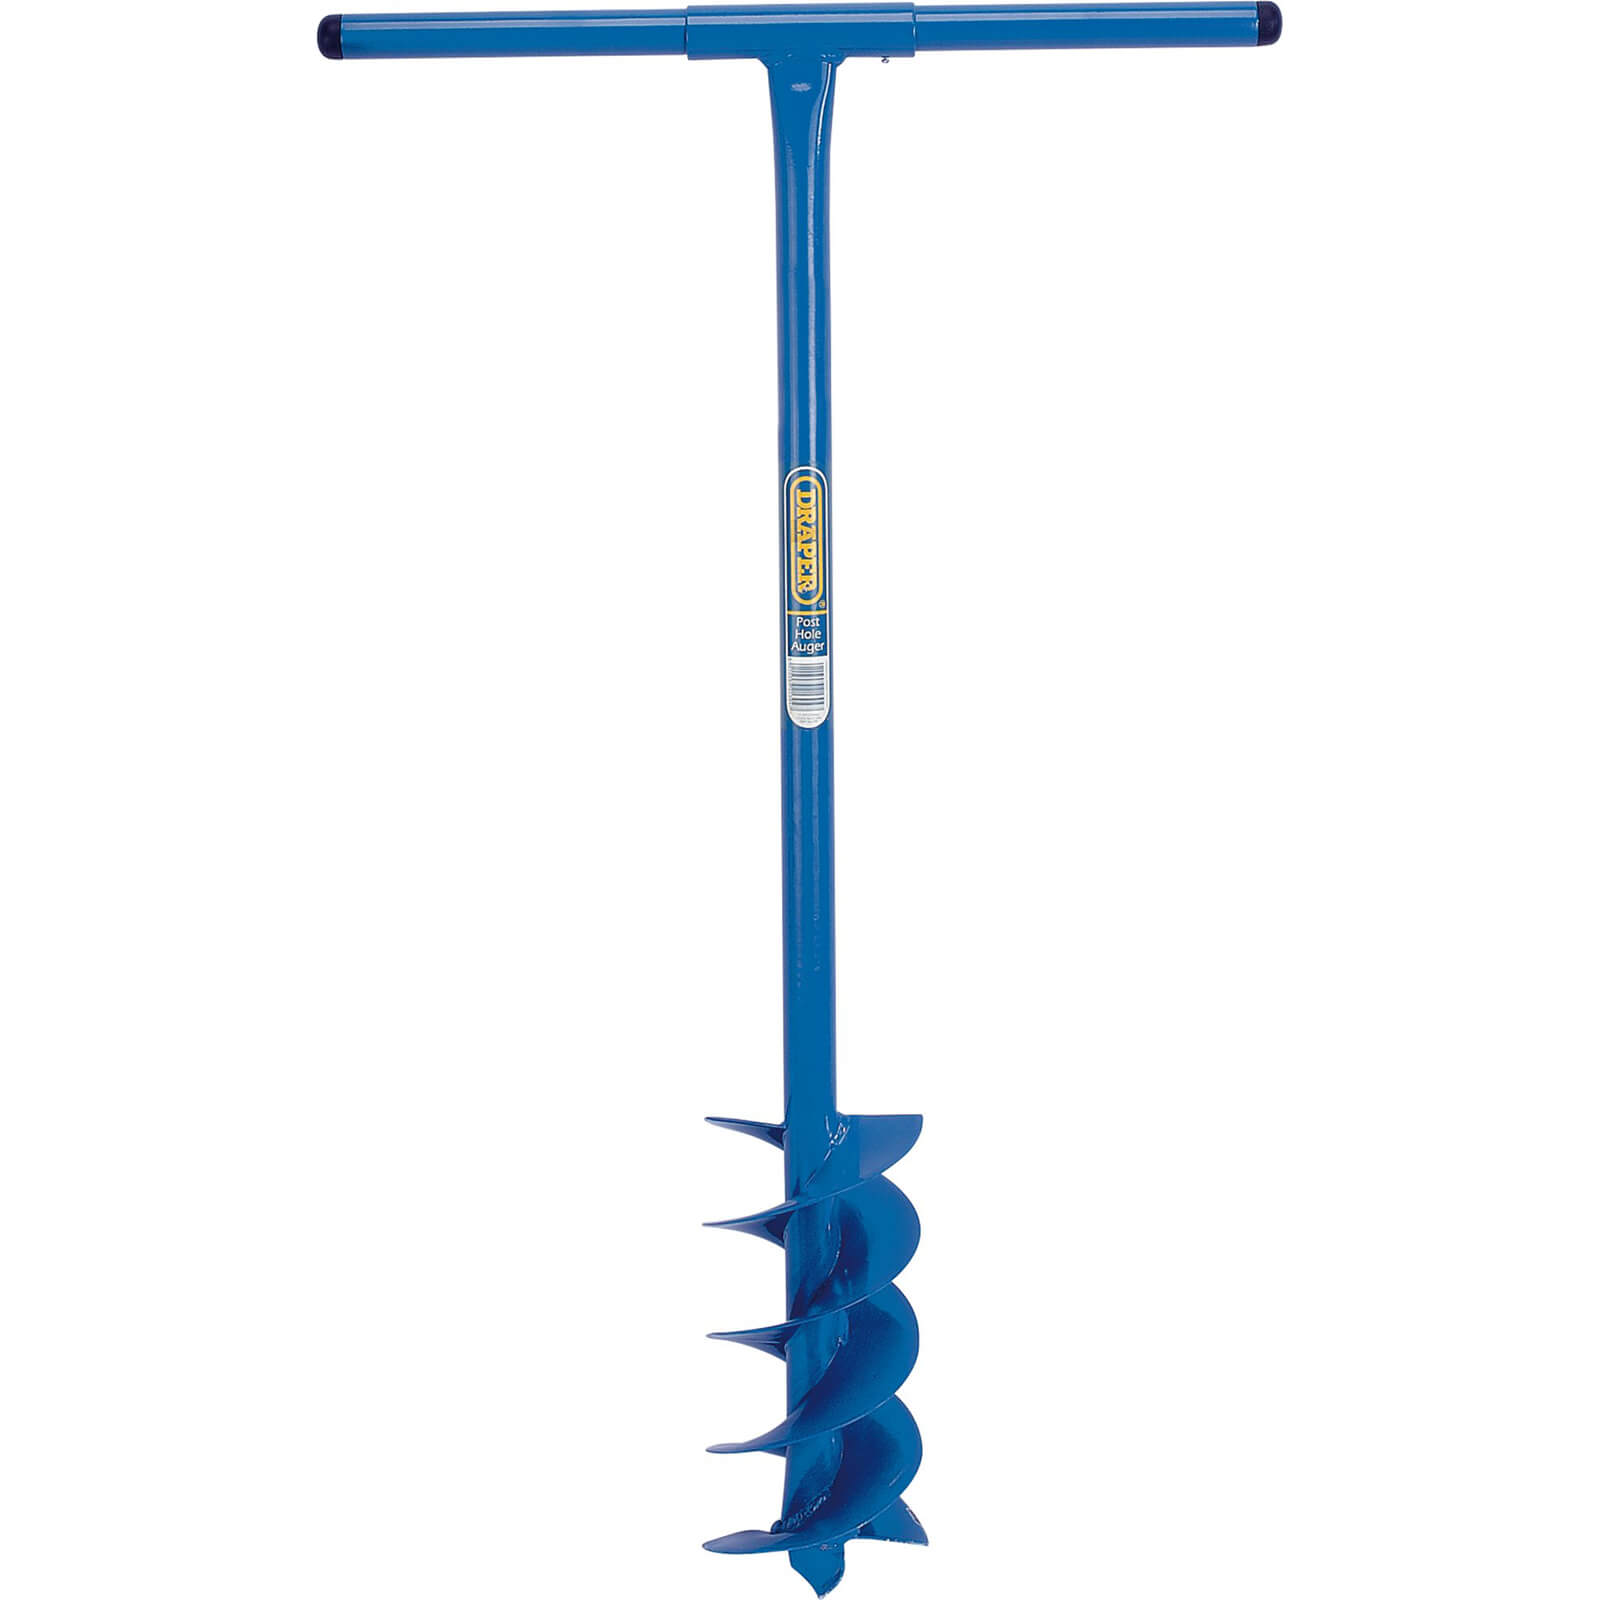 Photo of Draper Fence Post Auger